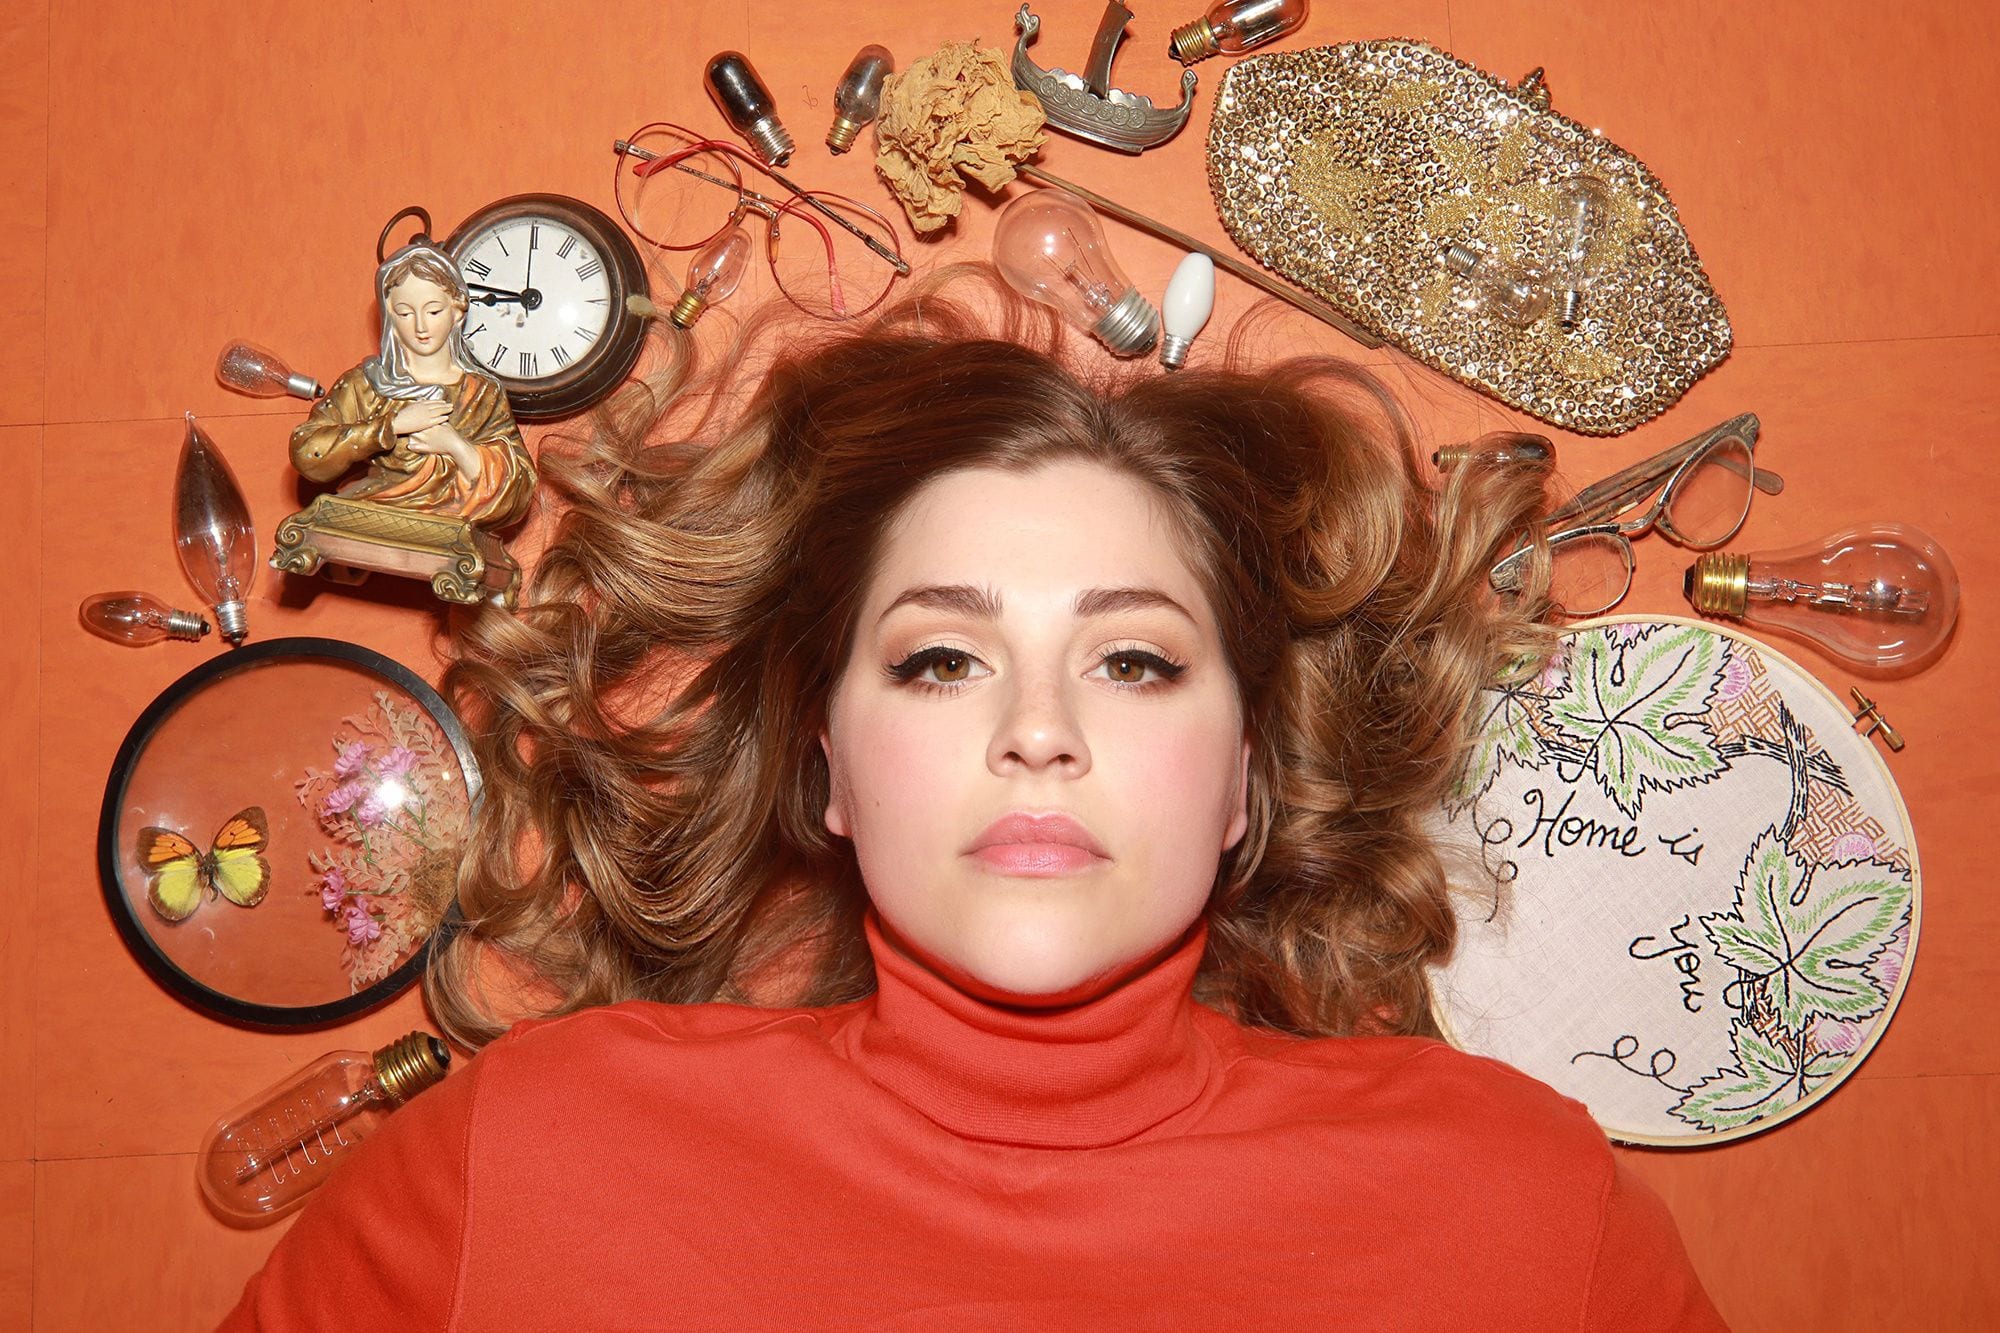 Natalie Schlabs Starts Living the Lifetime Dream With “That Early Love” (premiere + interview)